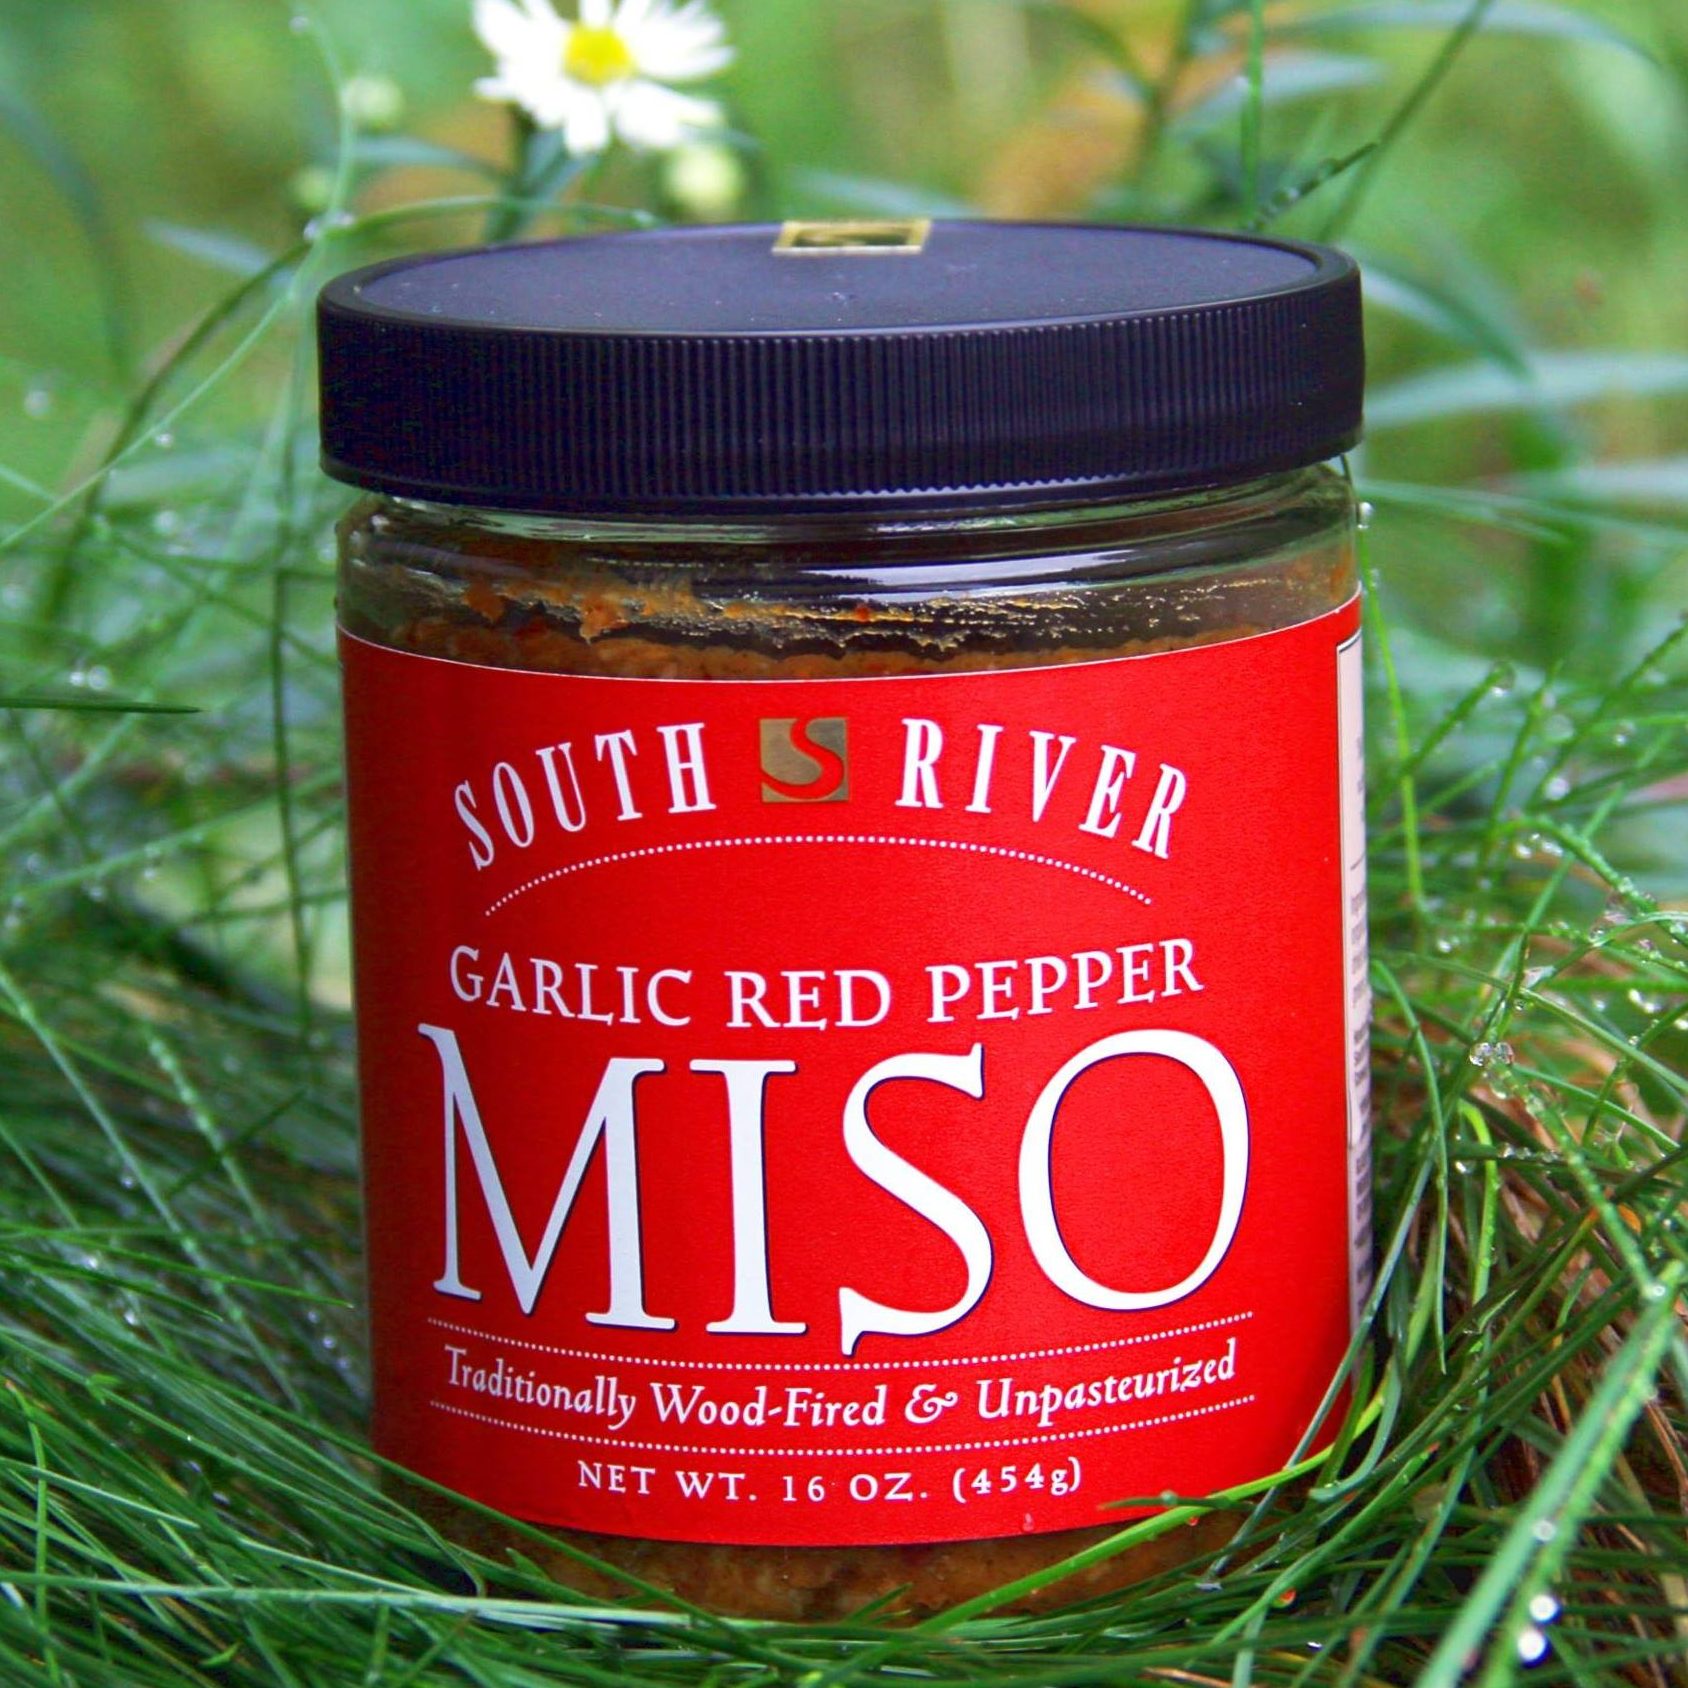 South River Miso